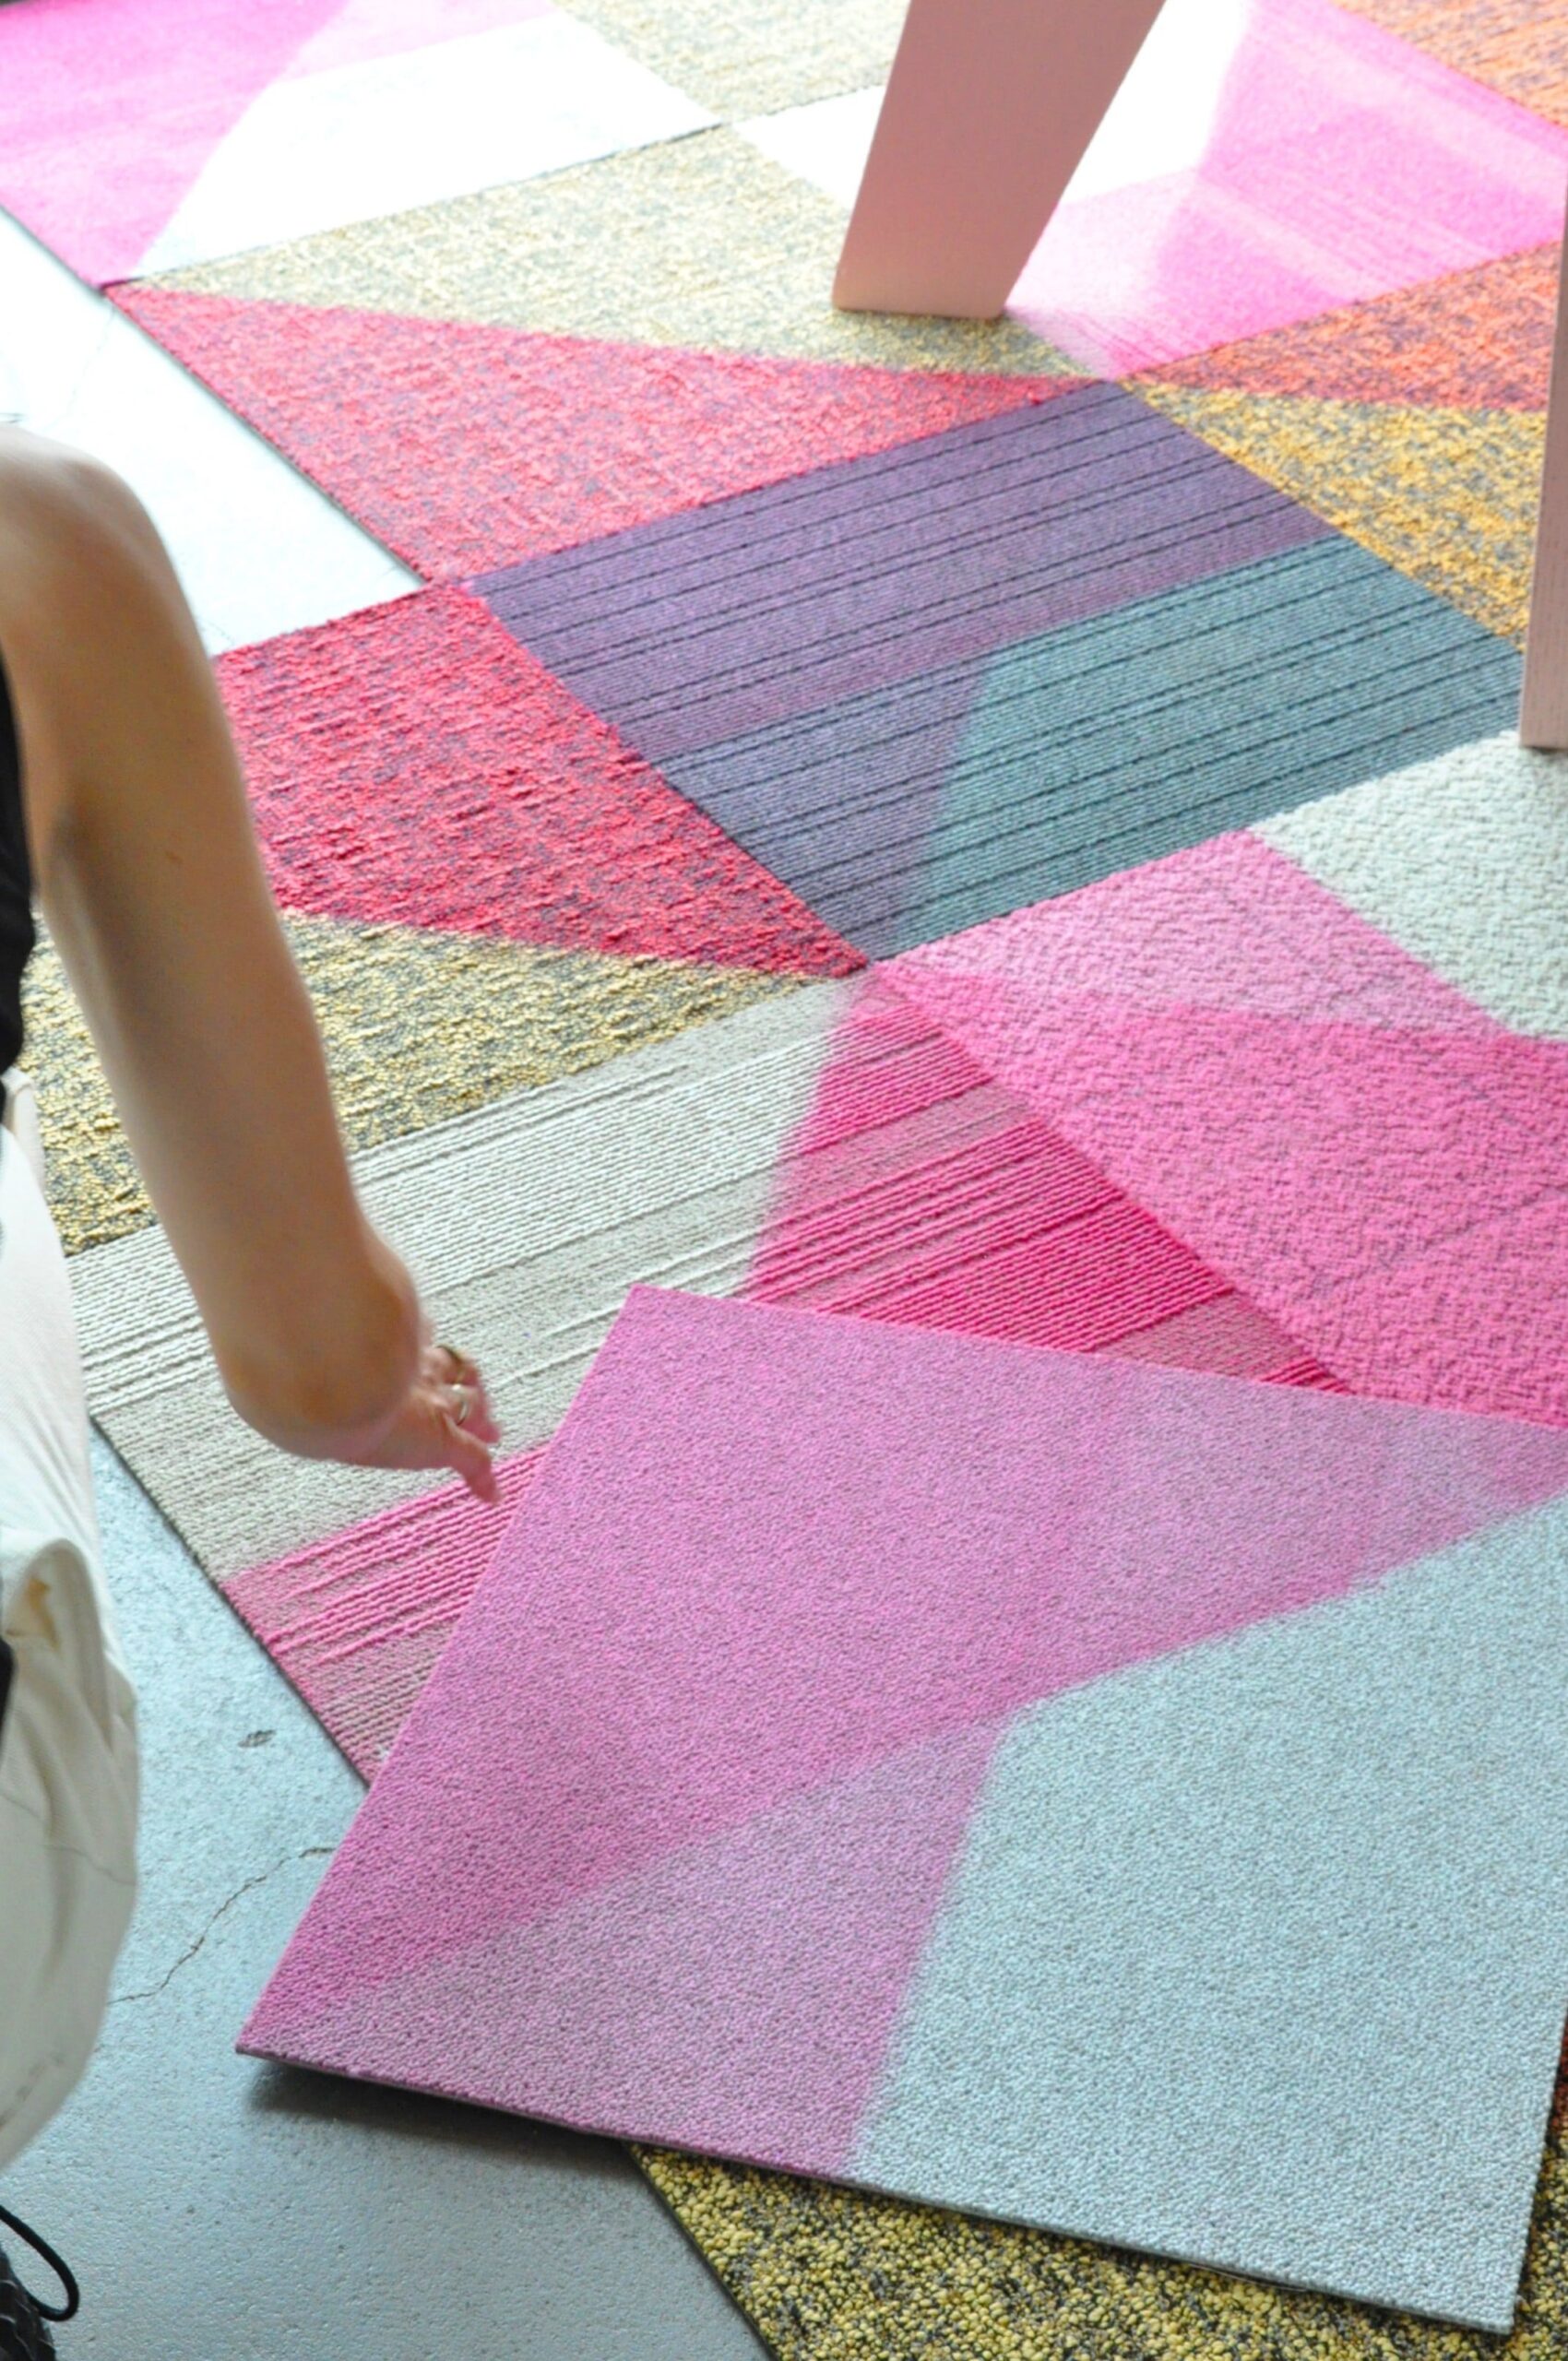 Why should one use carpet tiles in their house?